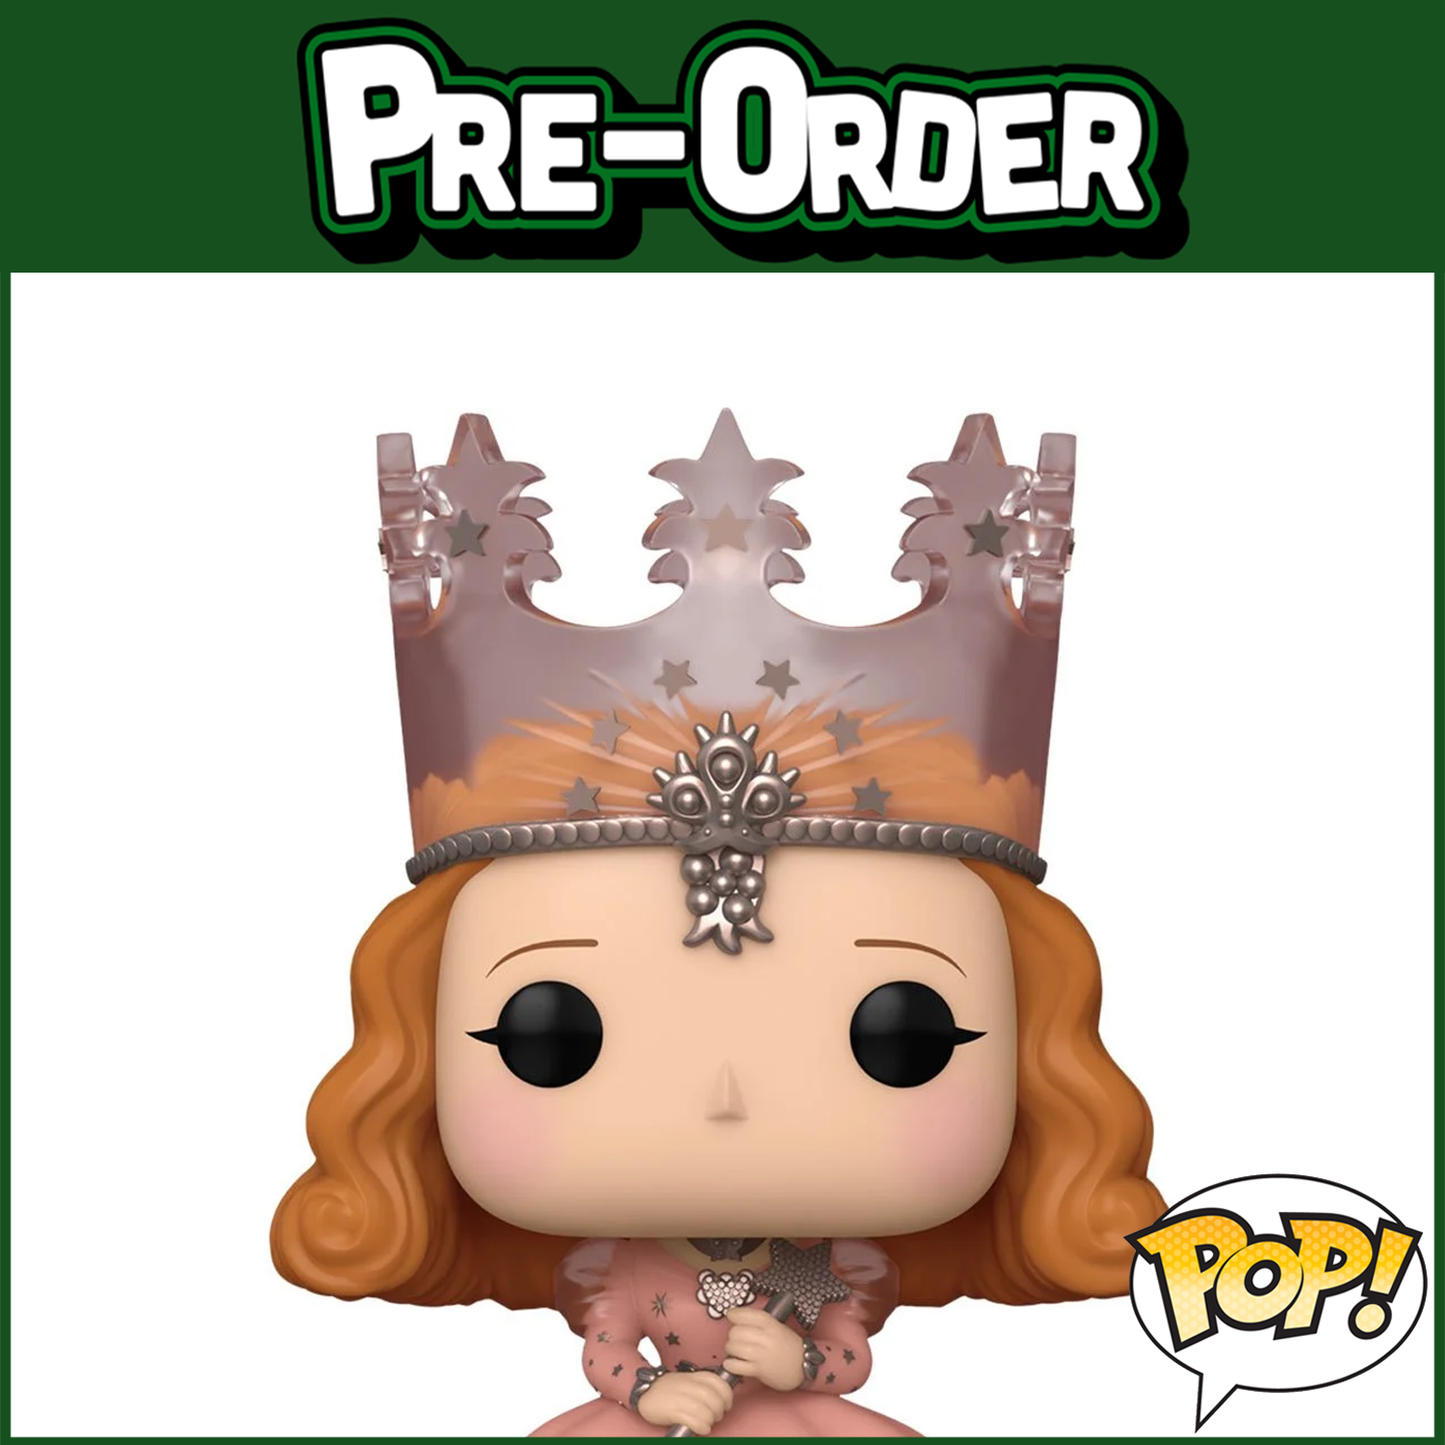 (PRE-ORDER) Funko POP! Movies: The Wizard of Oz 85th - Glinda The Good Witch #1518